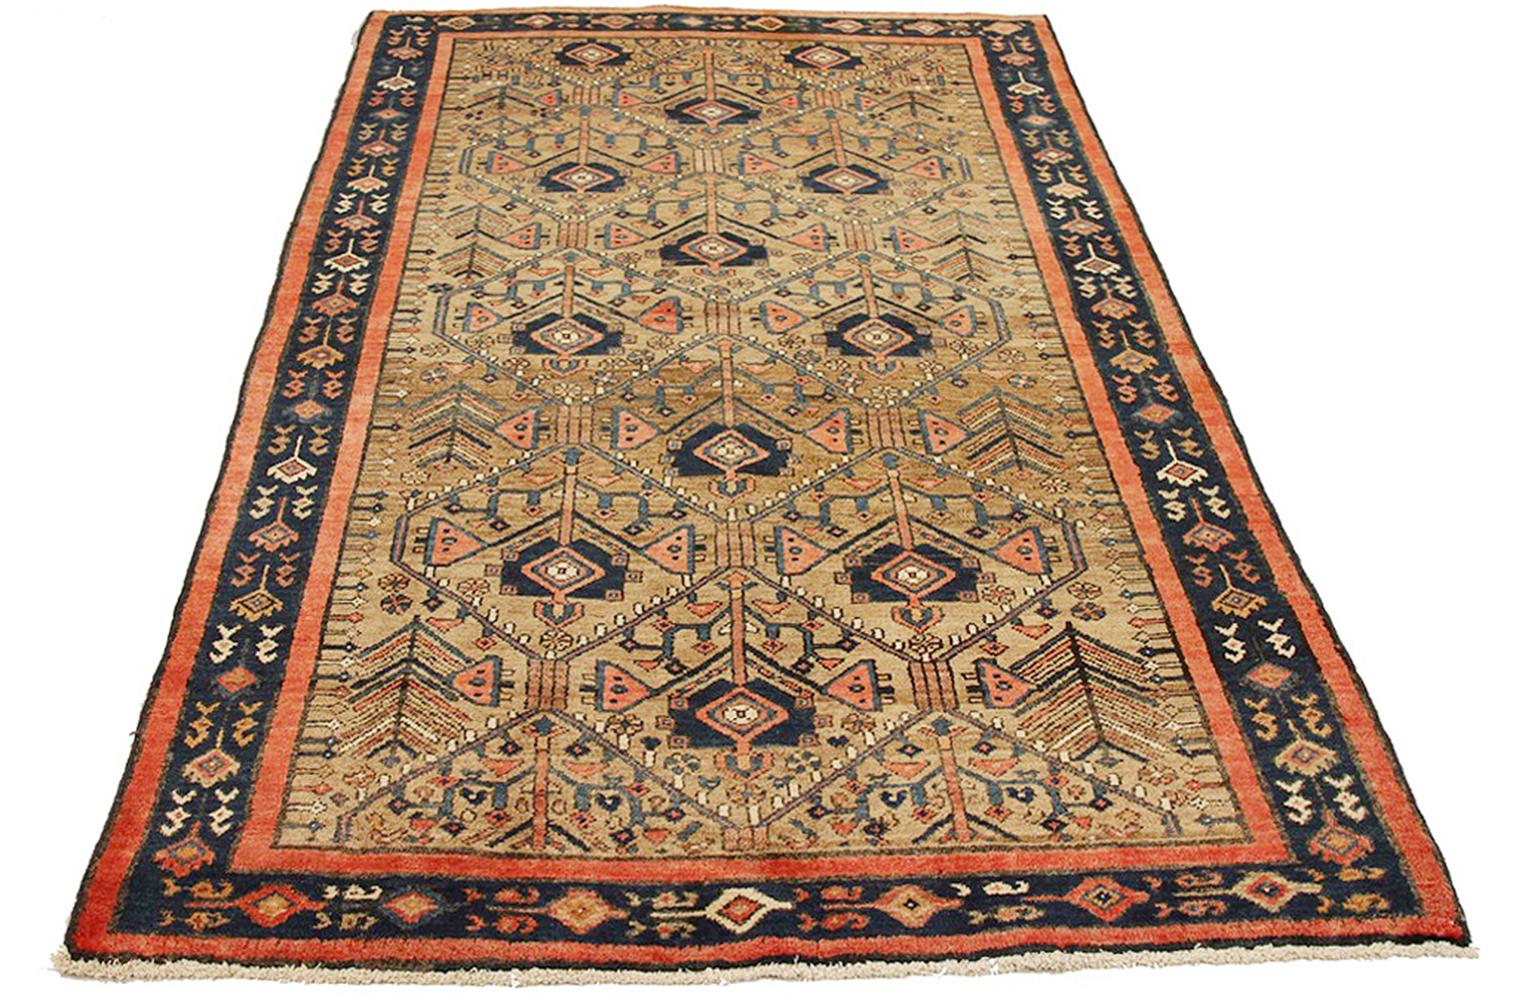 Antique Persian rug handwoven from the finest sheep’s wool and colored with all-natural vegetable dyes that are safe for humans and pets. It’s a traditional Hamedan design featuring floral patterns in lovely colors of pink and navy over a beige